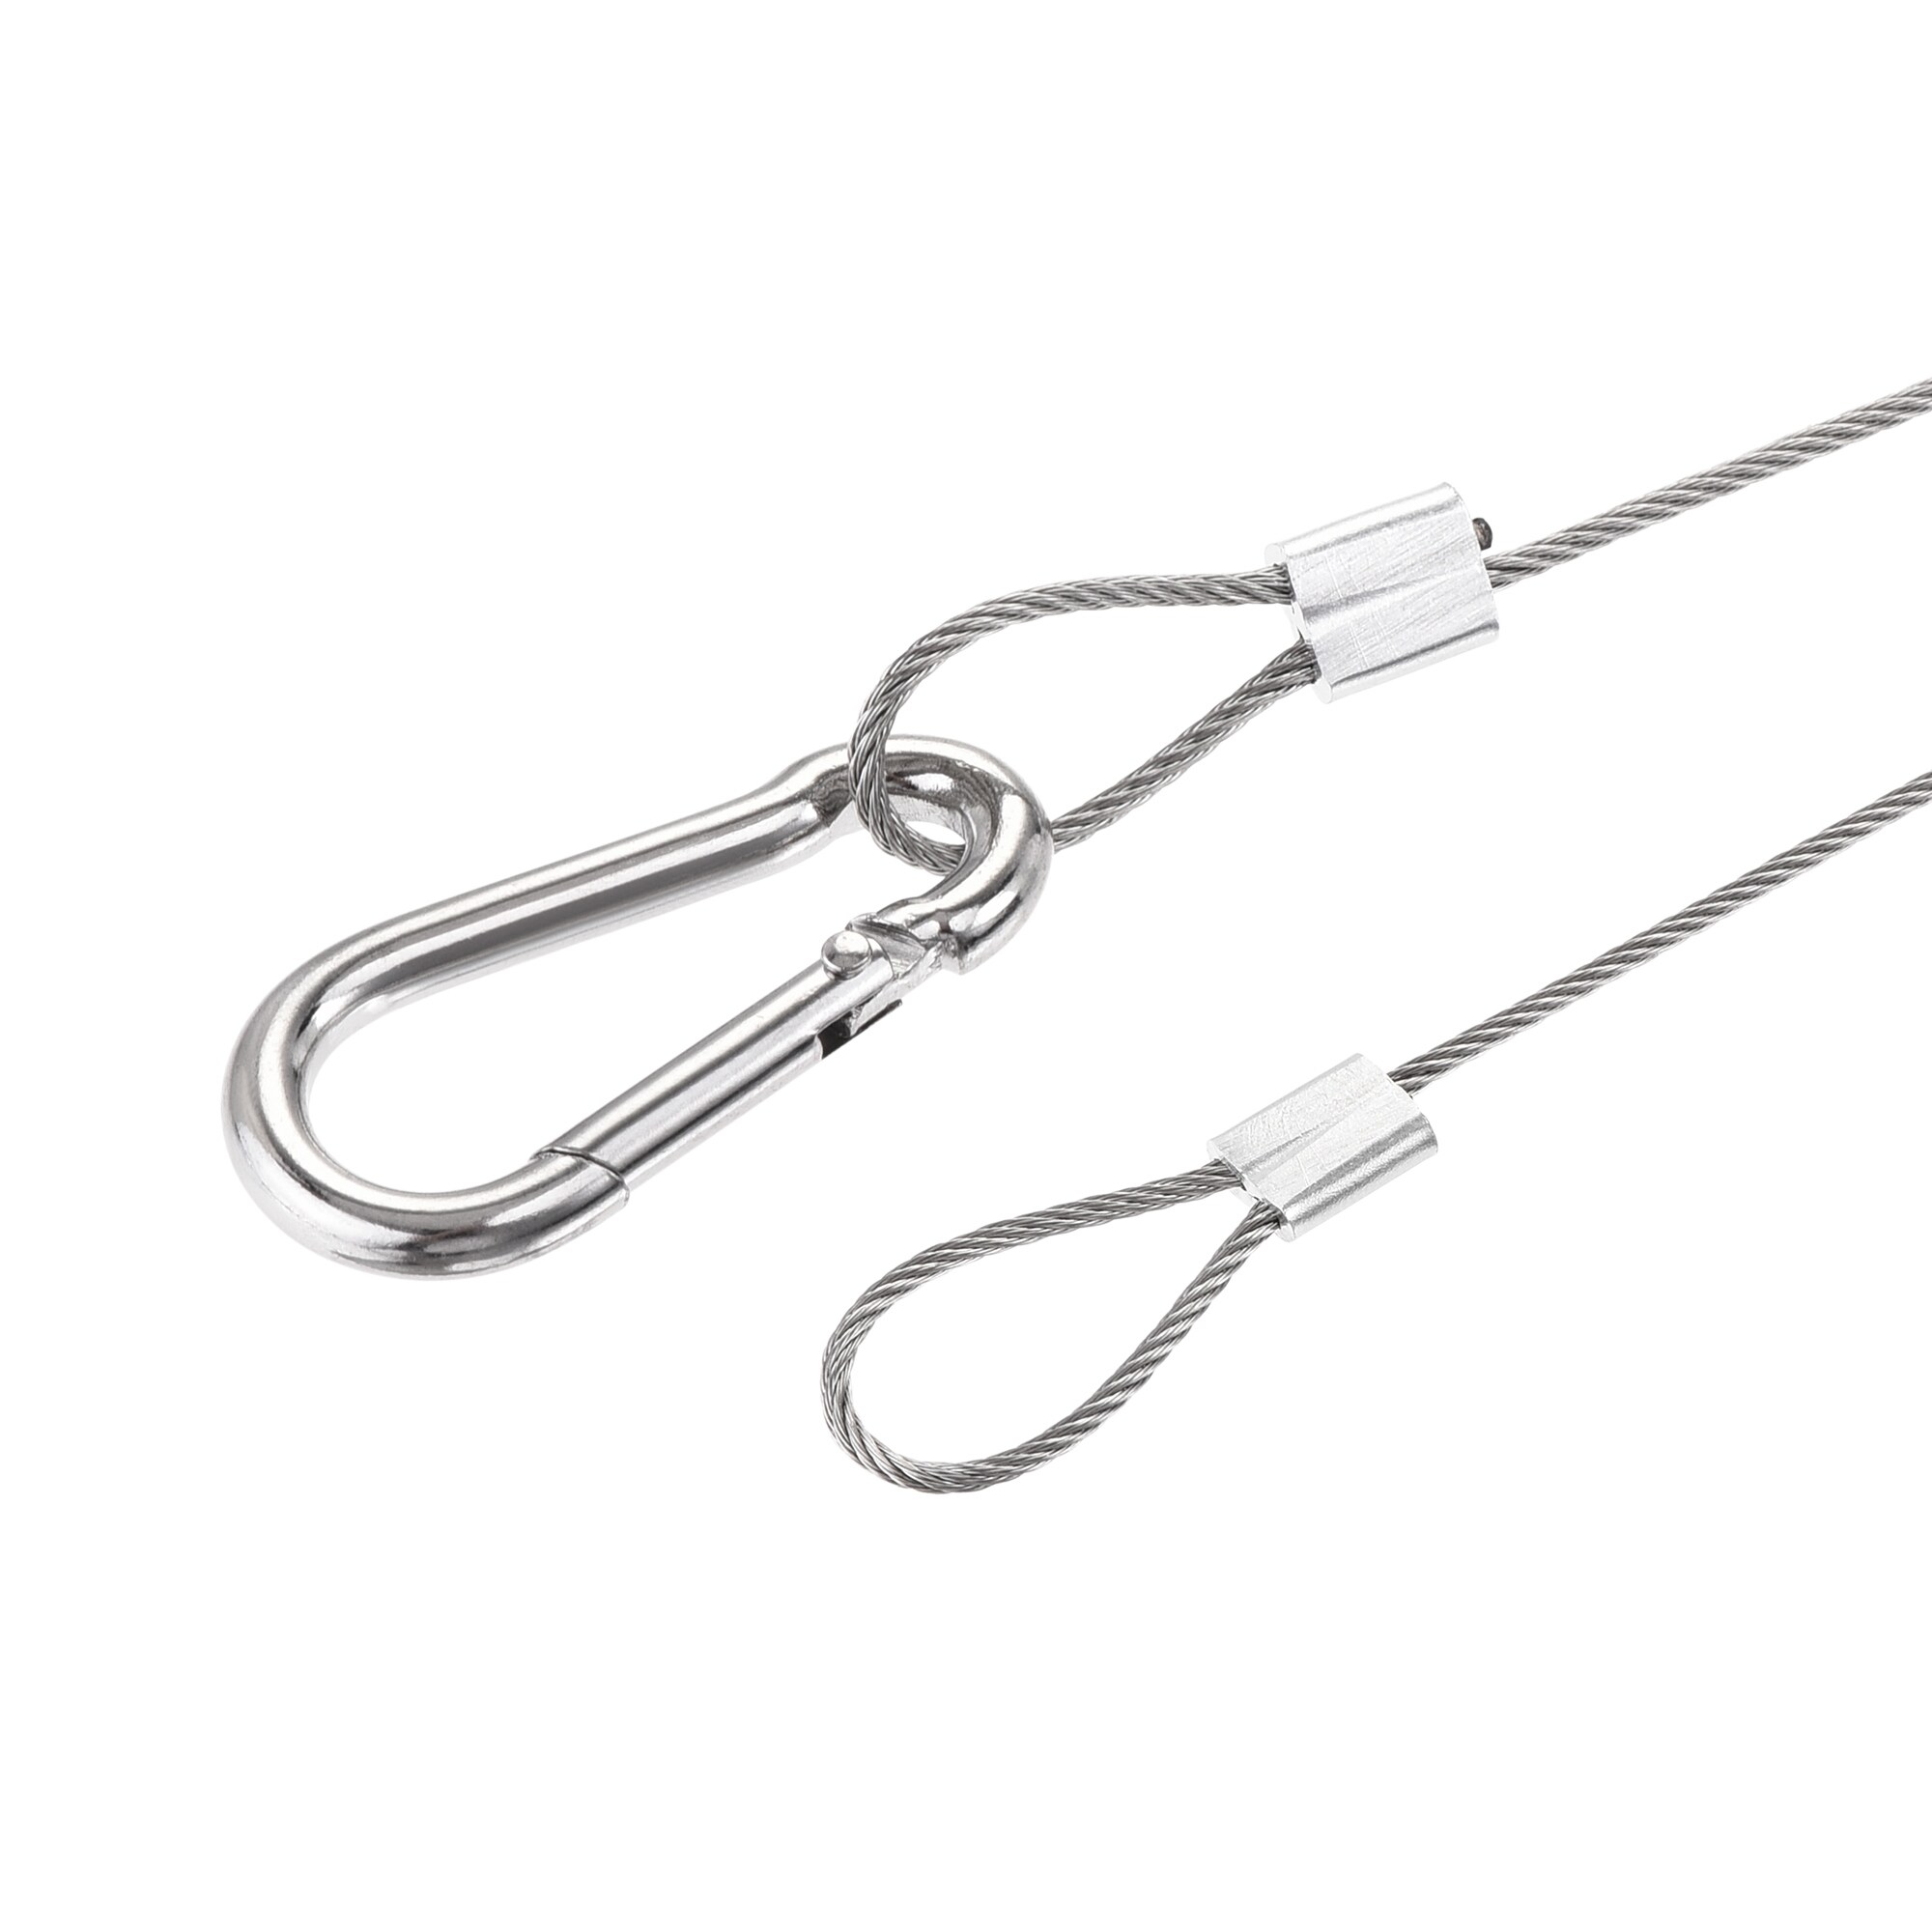 Picture Hanging Wire Kit, 2set 2m Loop and Hook Hanging Wire Load 66 lbs - Silver